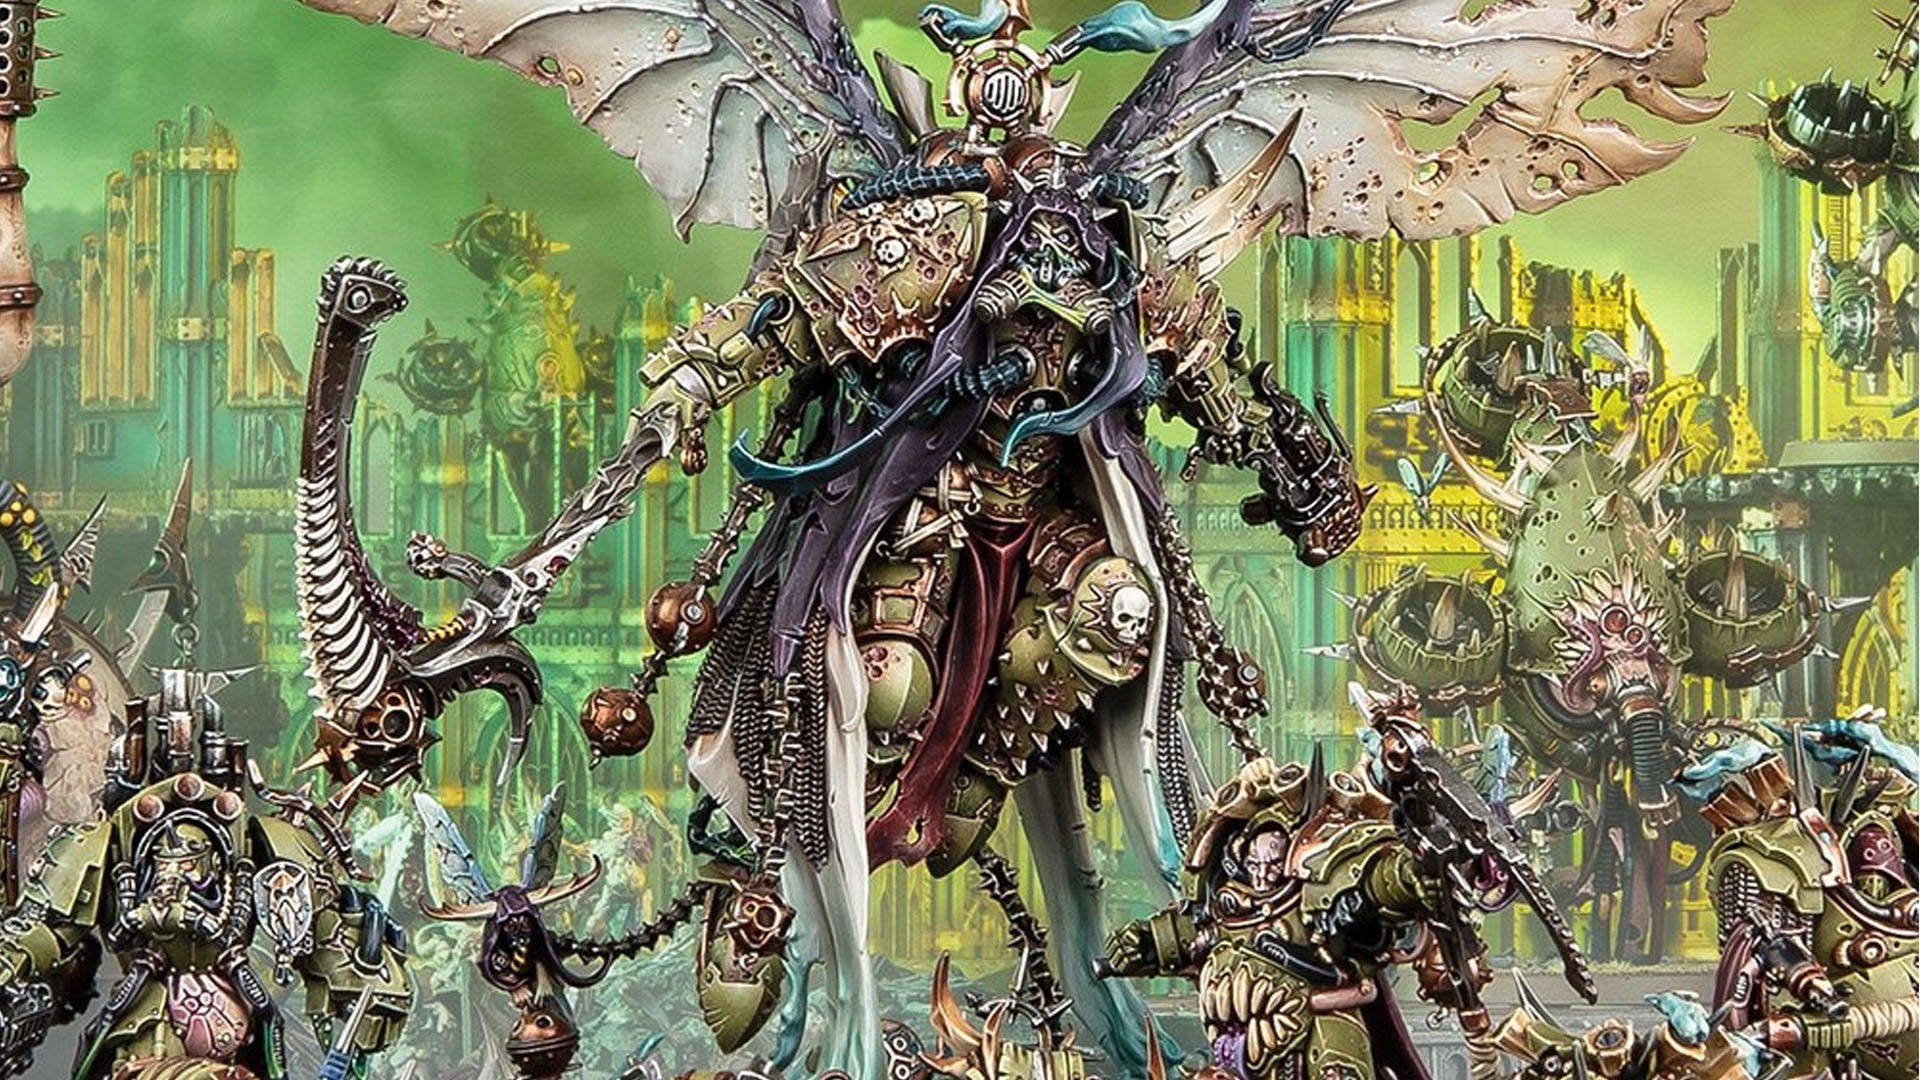 Warhammer 40k Mortarion Primarch guide - Games Workshop photo showing the new 40k Mortarion model fully painted at the head of Death Guard army